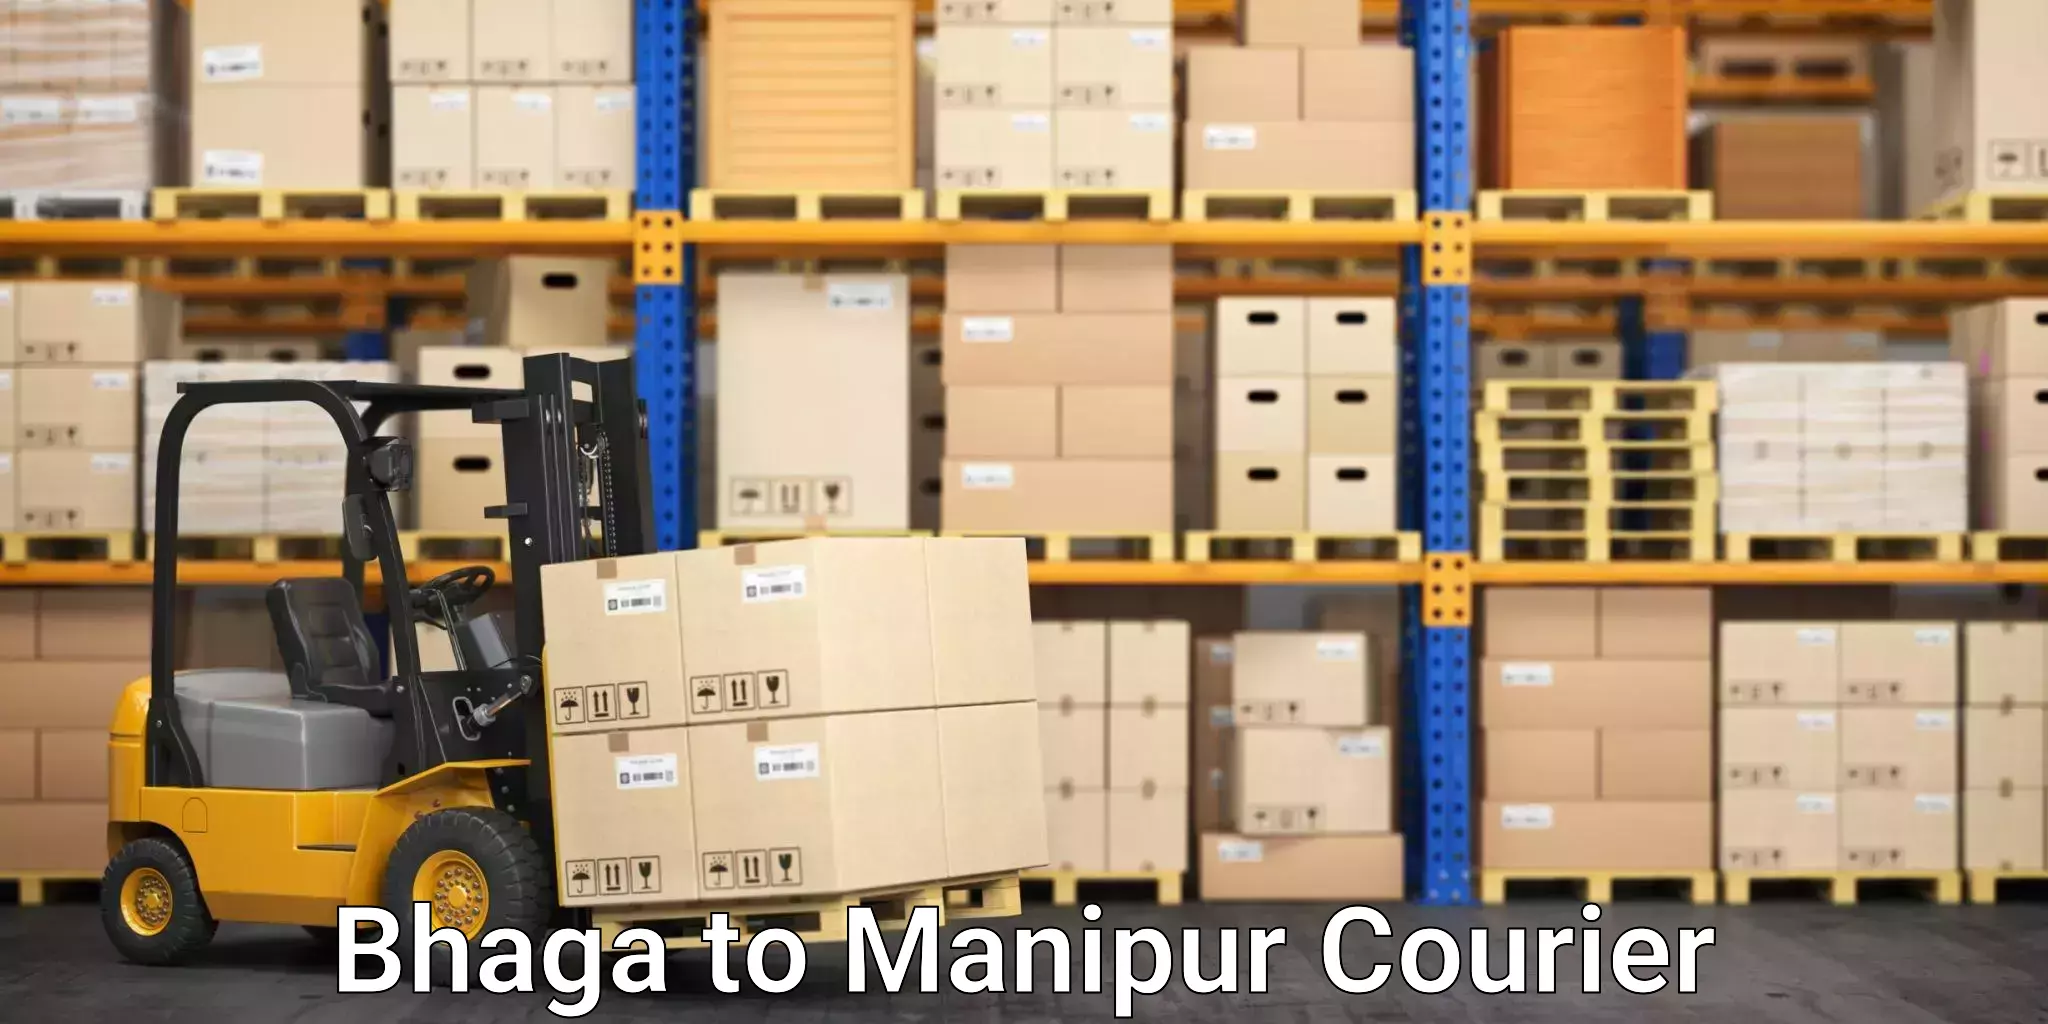 Flexible shipping options Bhaga to Imphal